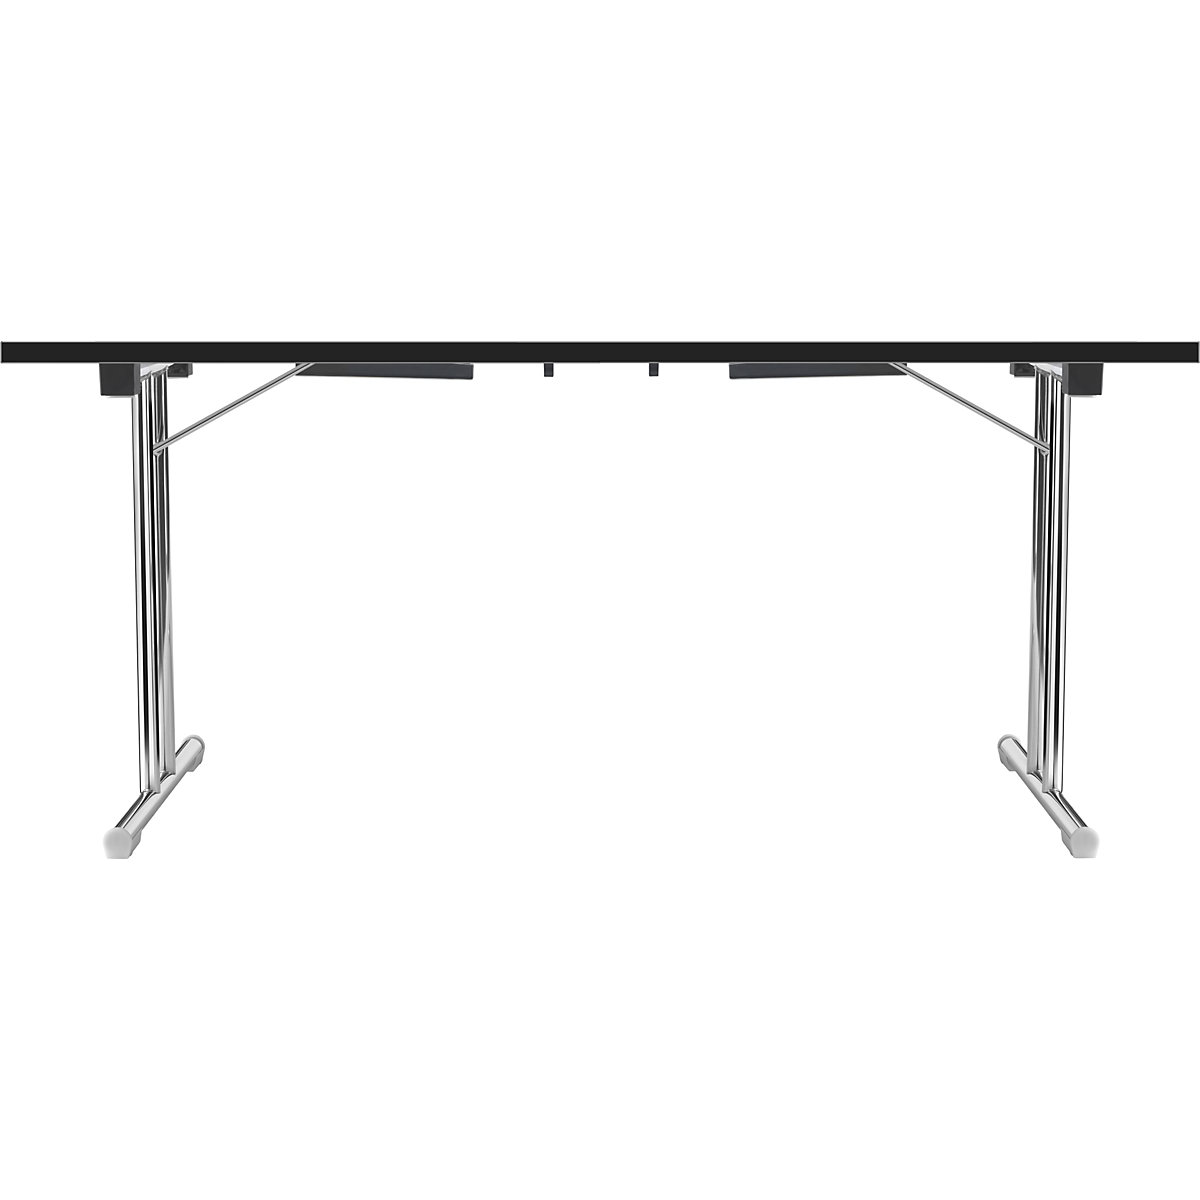 Folding table with double T base, tubular steel frame, chrome plated, white/black, WxD 1400 x 700 mm-2